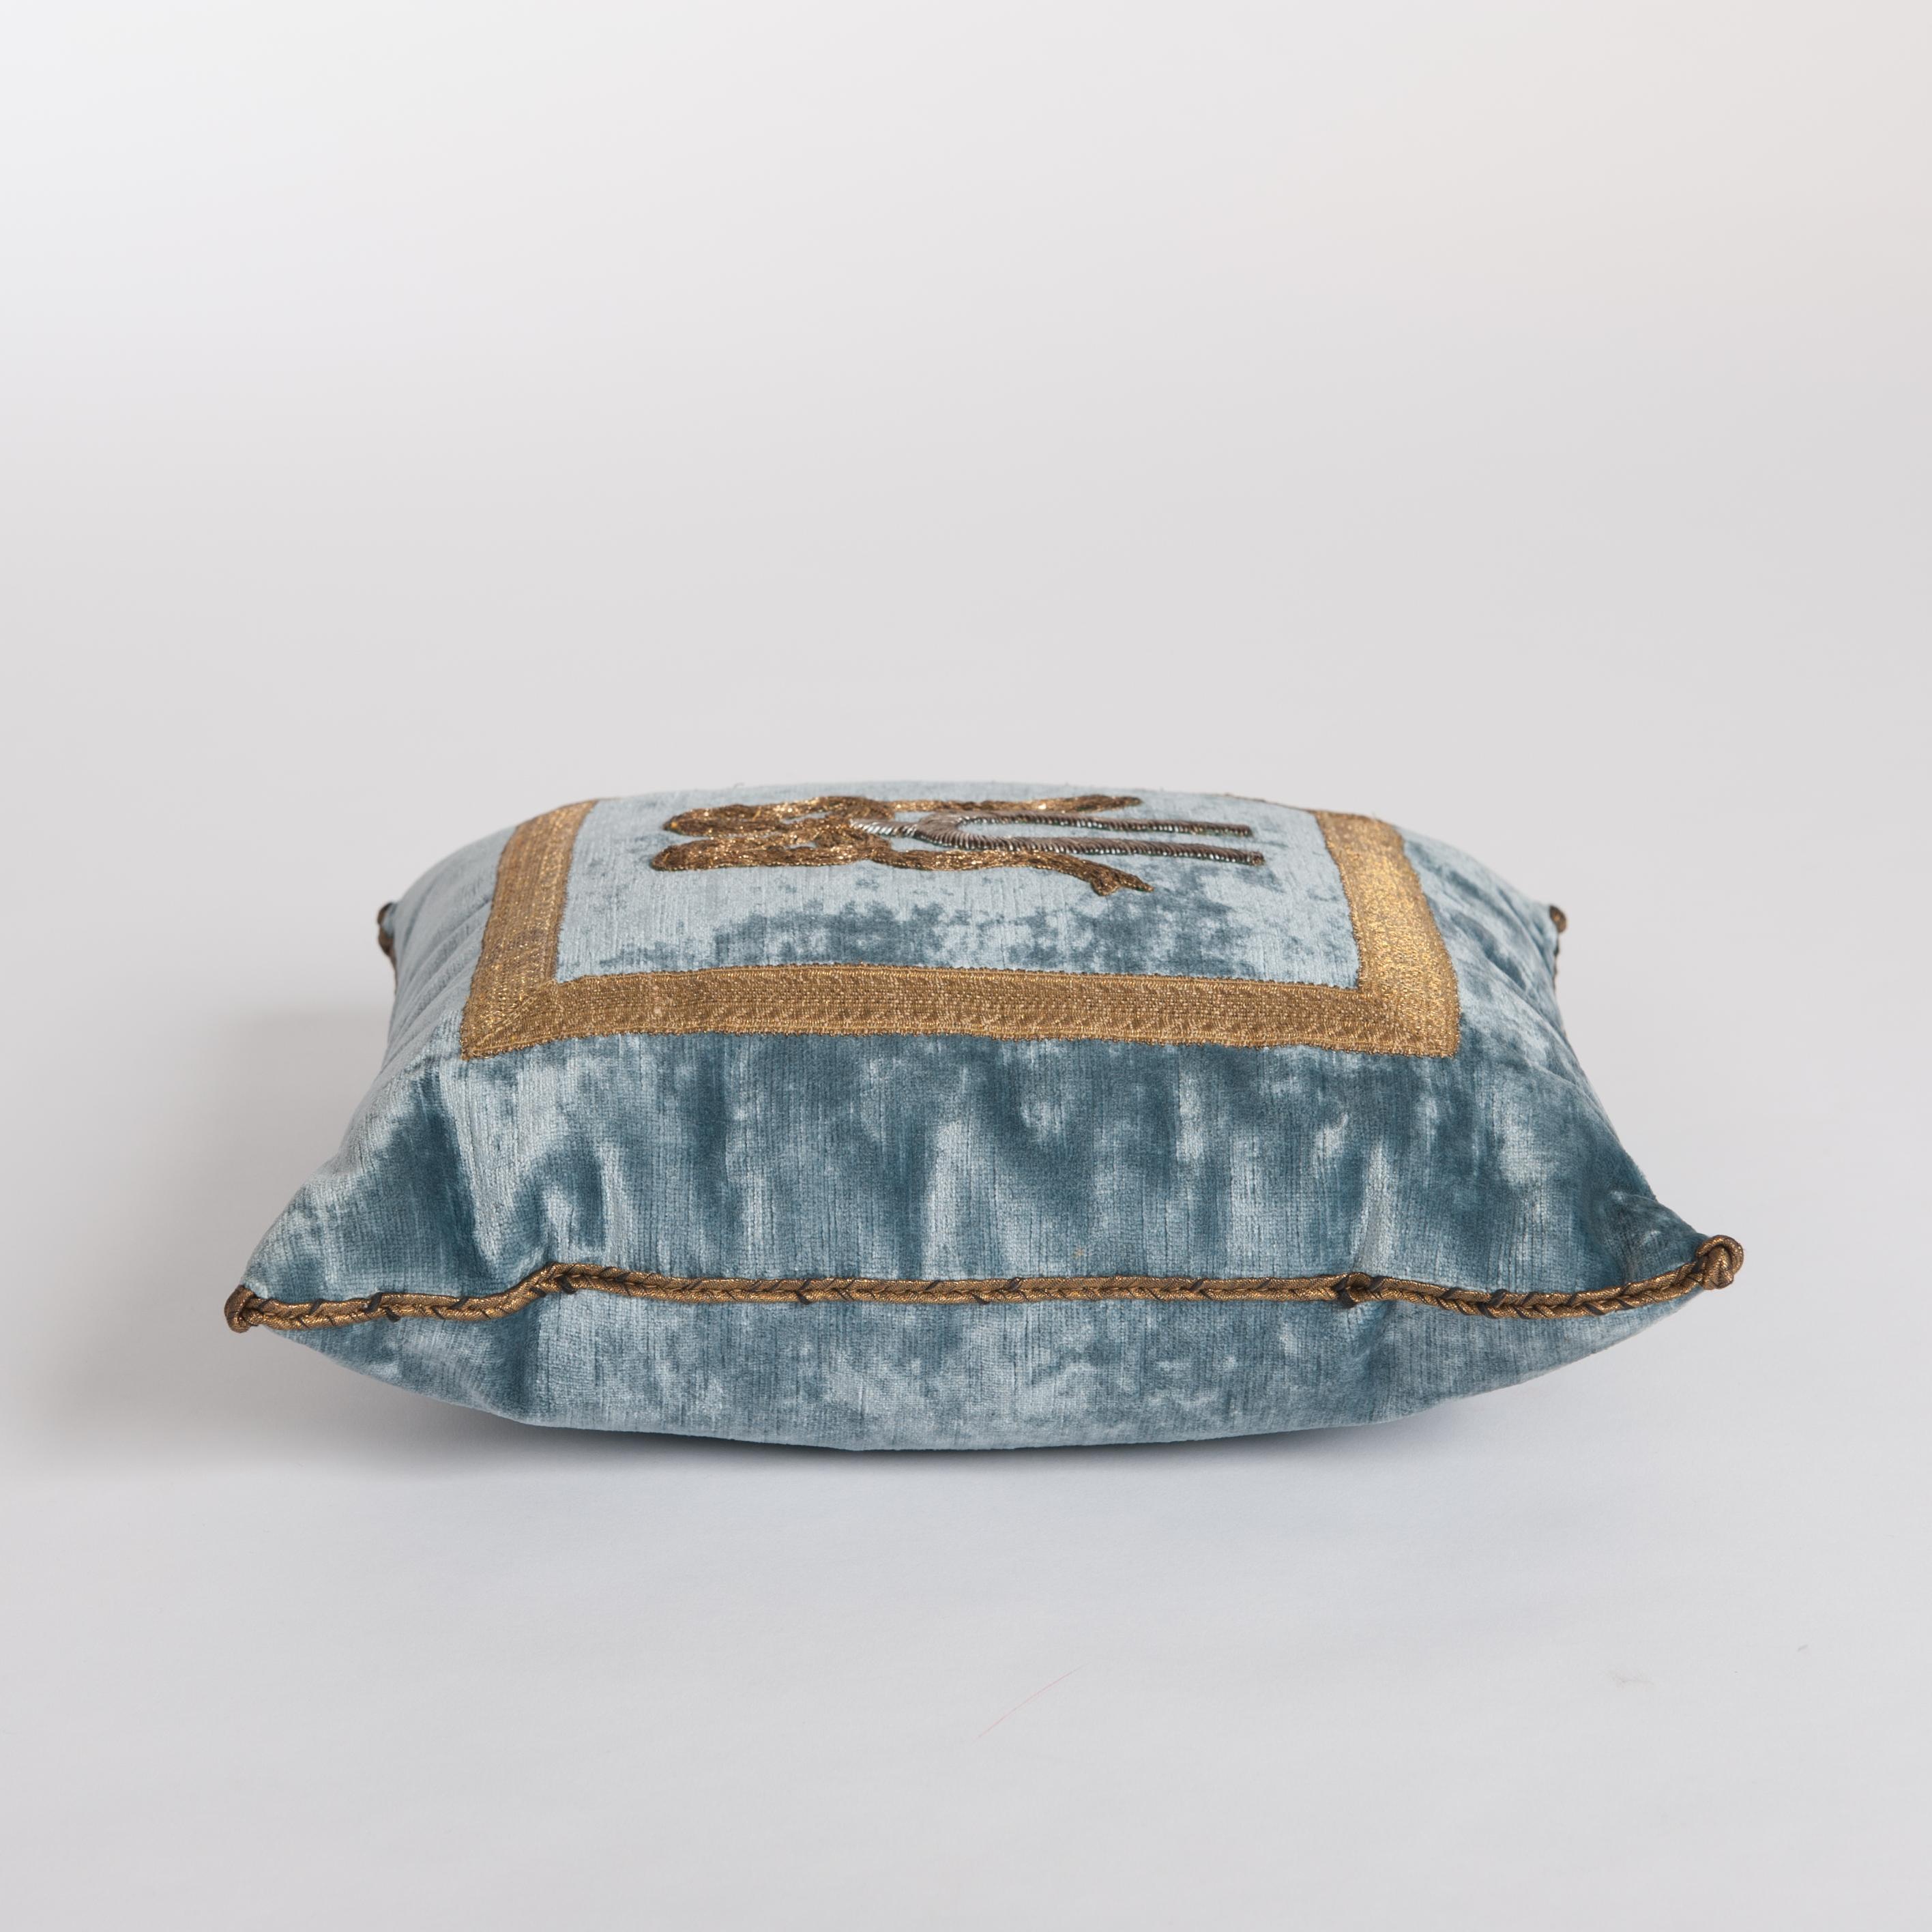 Louis XVI Pillow with Antique Silver and Gold Metallic Embroidery on French Blue Velvet